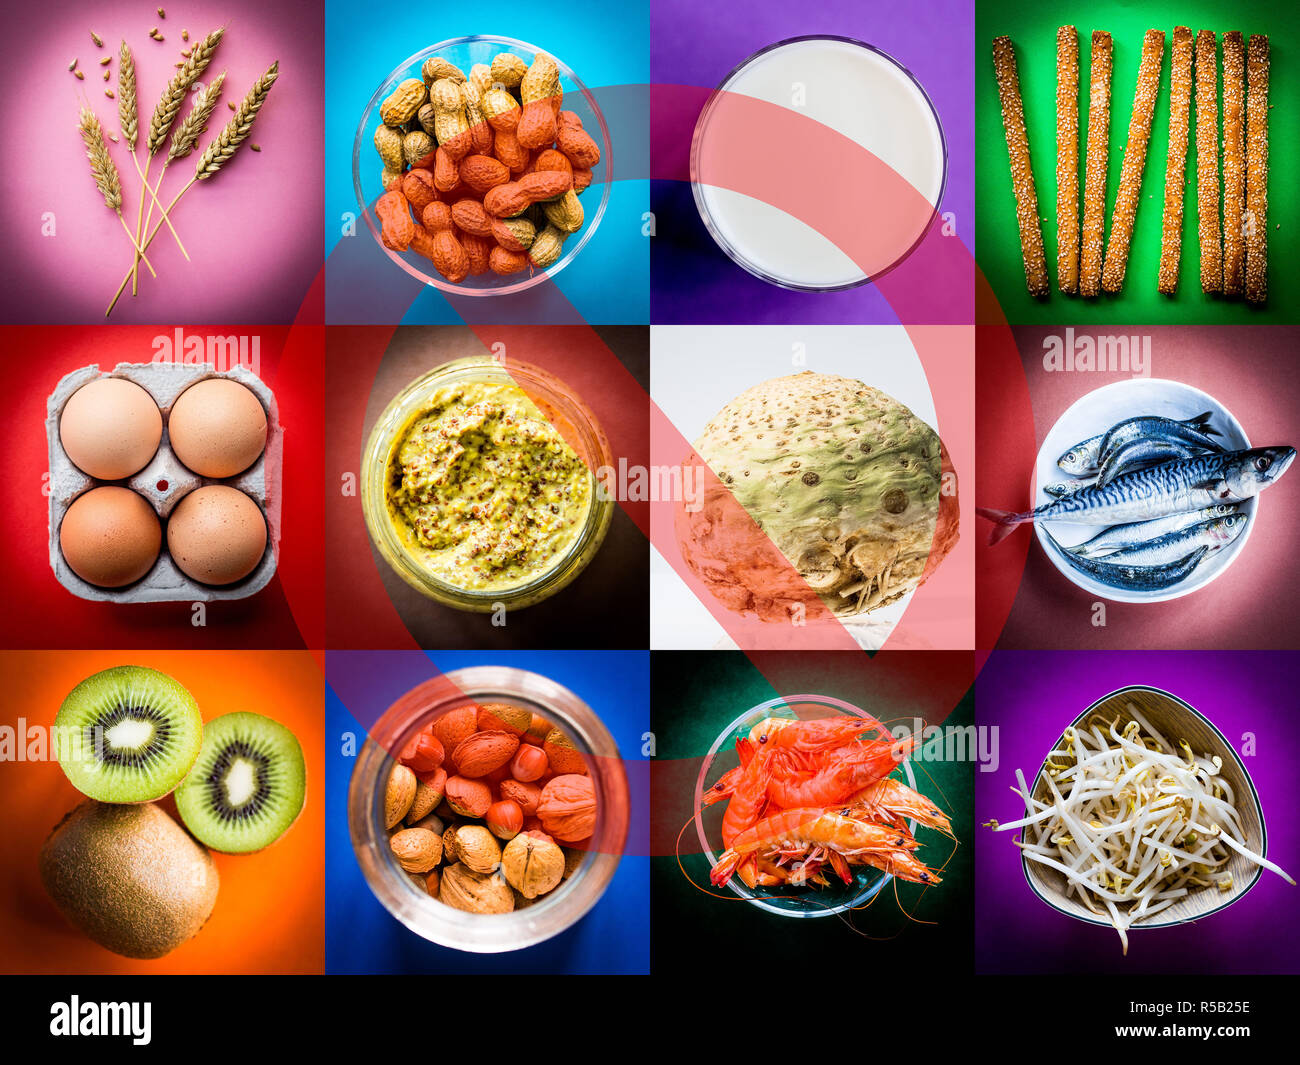 Different allergenic food products. Stock Photo